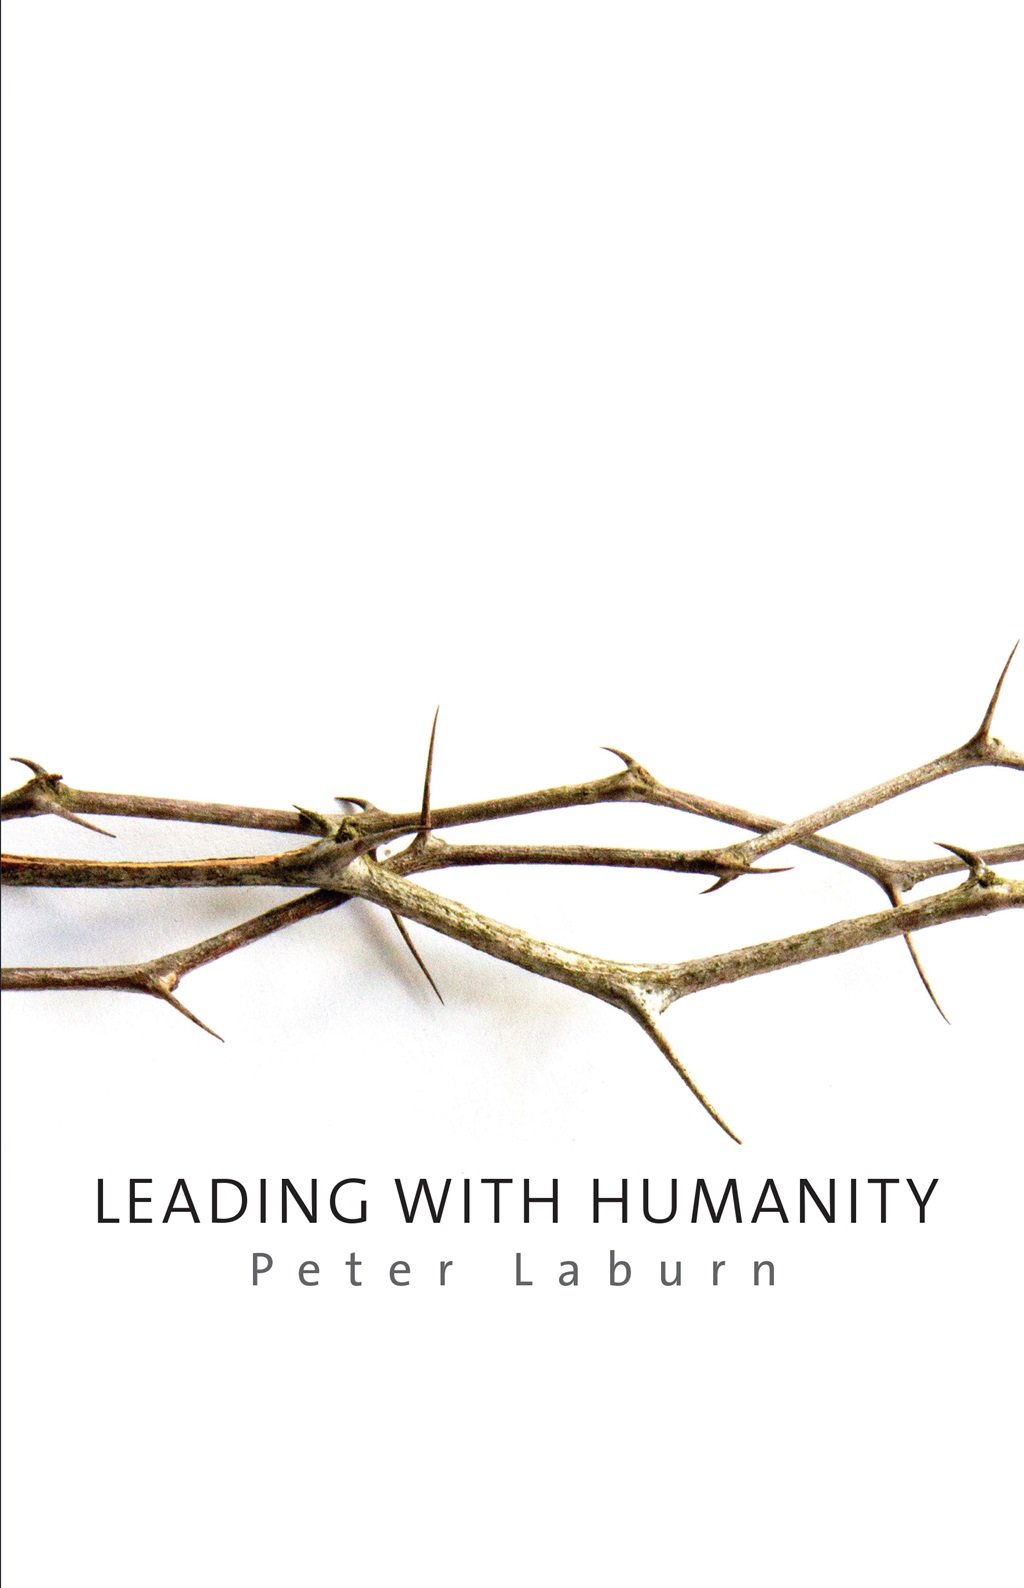 Leading with Humanity by Peter Laburn.